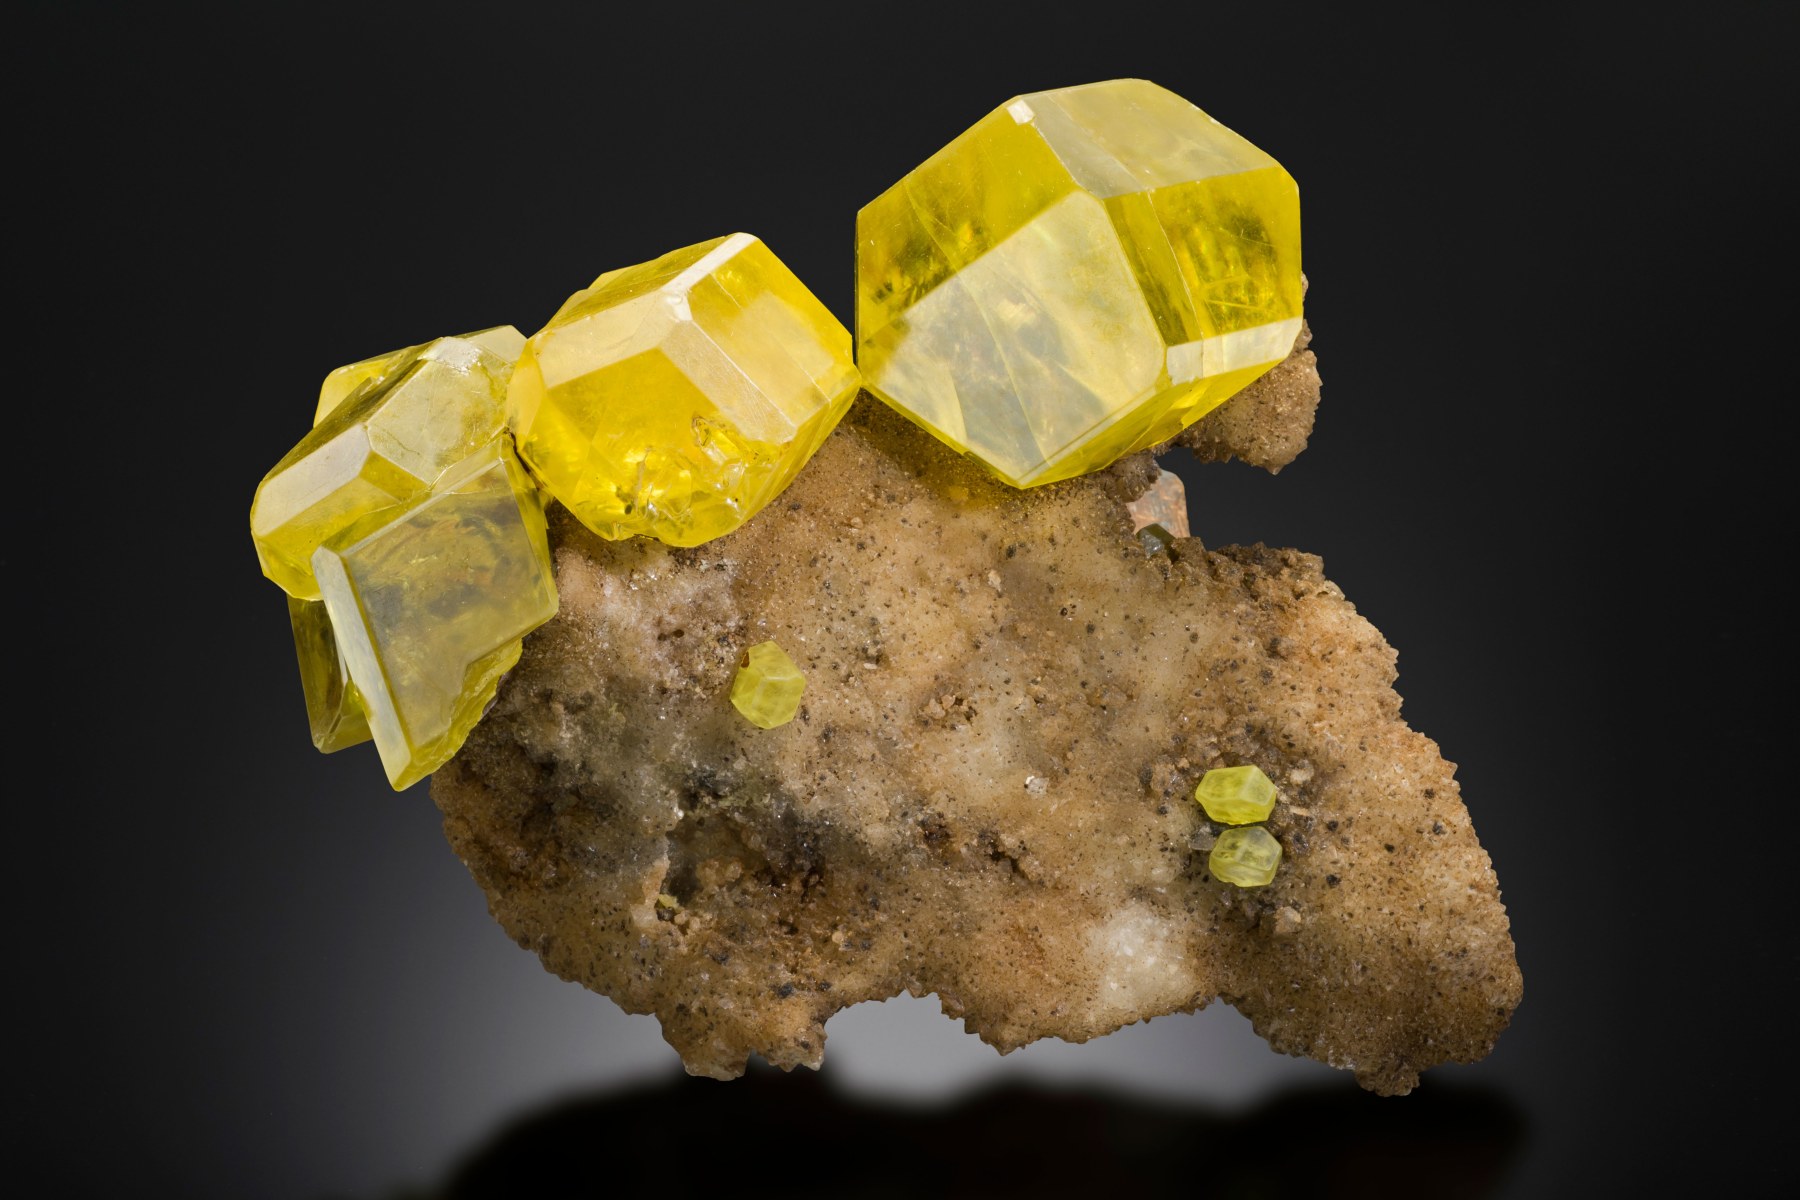 Sulphur on Aragonite with Bitumen, Sicily, Italy

This sulphur specimen is a beautiful example of its type, with excellent crystal form, translucency and lustre. Both the sulphur and aragonite are, however, quite common minerals, so are relegated in this view of the world to the fourth caste.